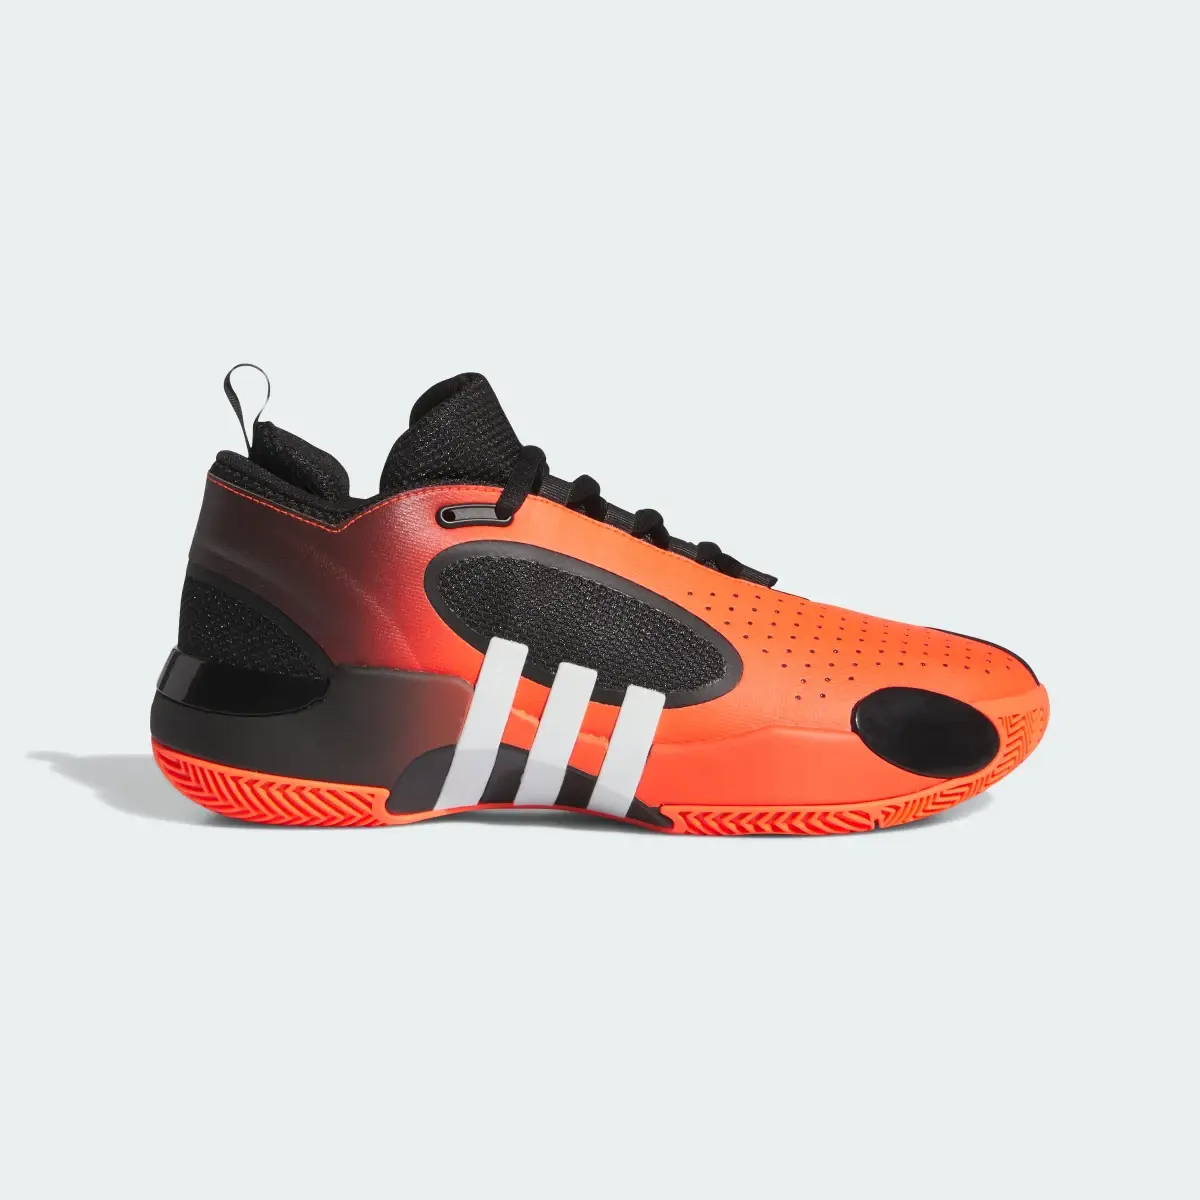 Adidas D.O.N Issue 5 Basketball Shoes. 2